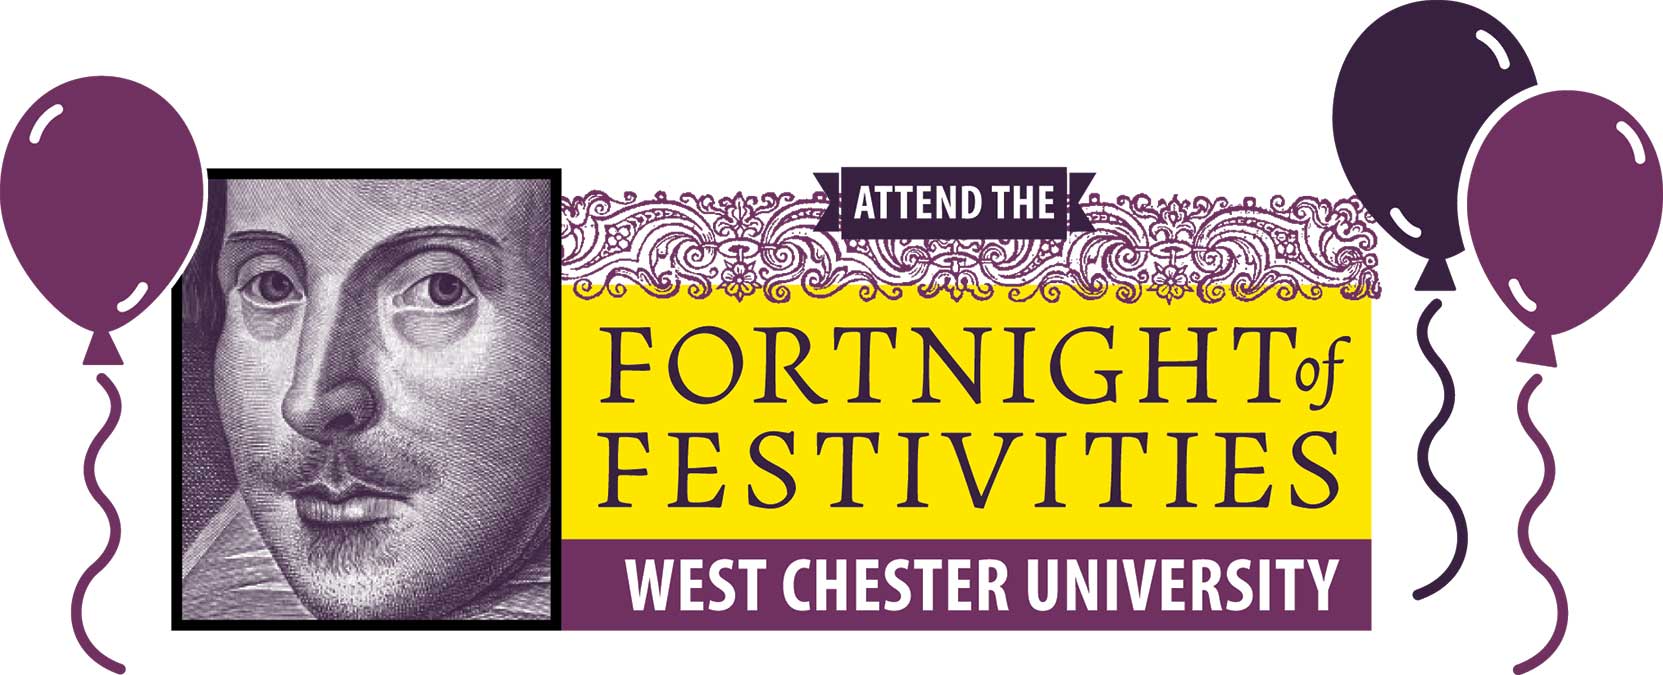 Attend the Fortnight of Festivities at West Chester University